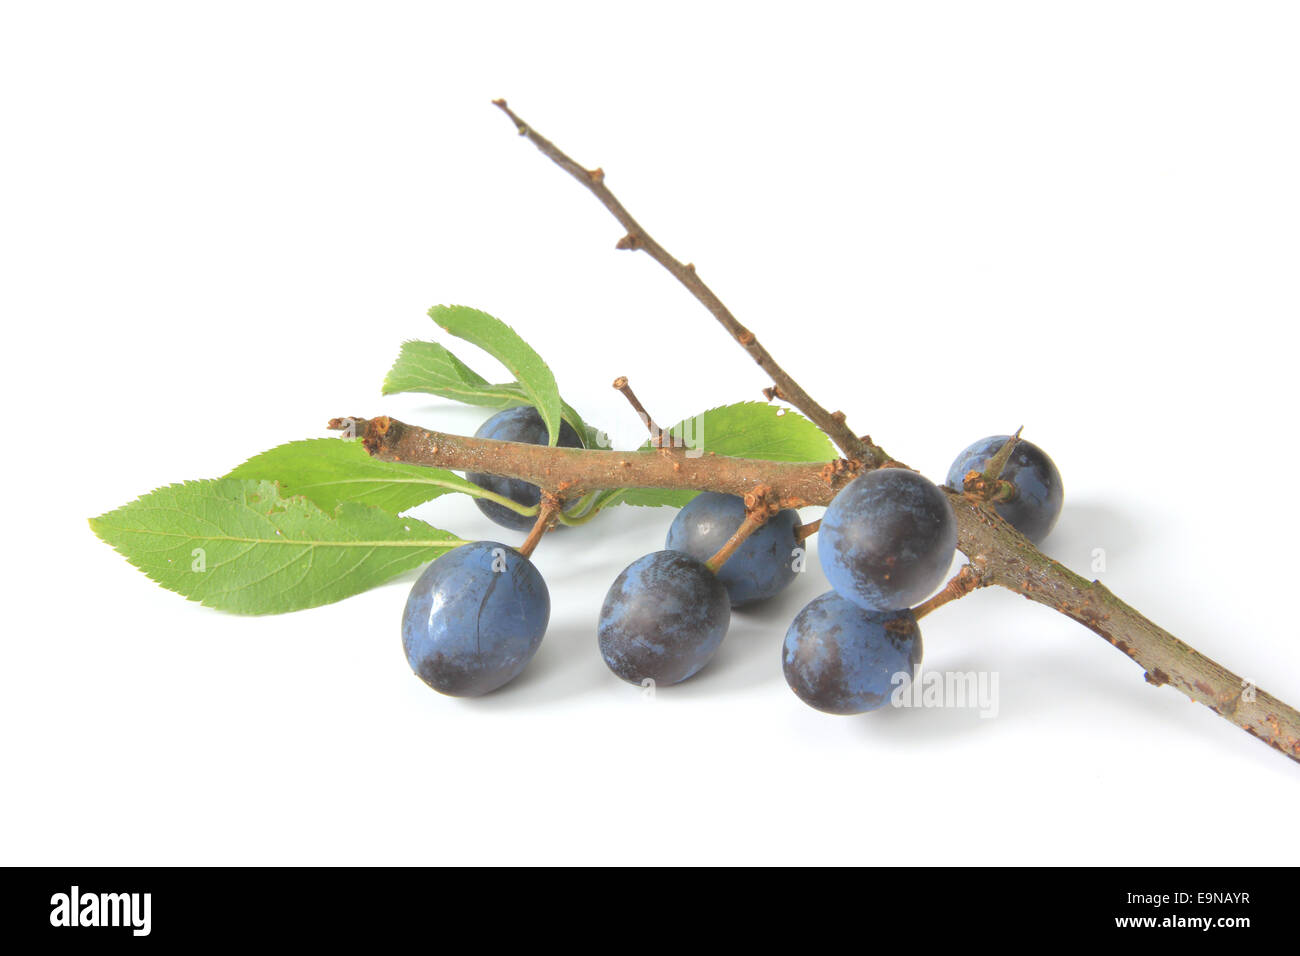 Sloes - Fruits of blackthorn Stock Photo